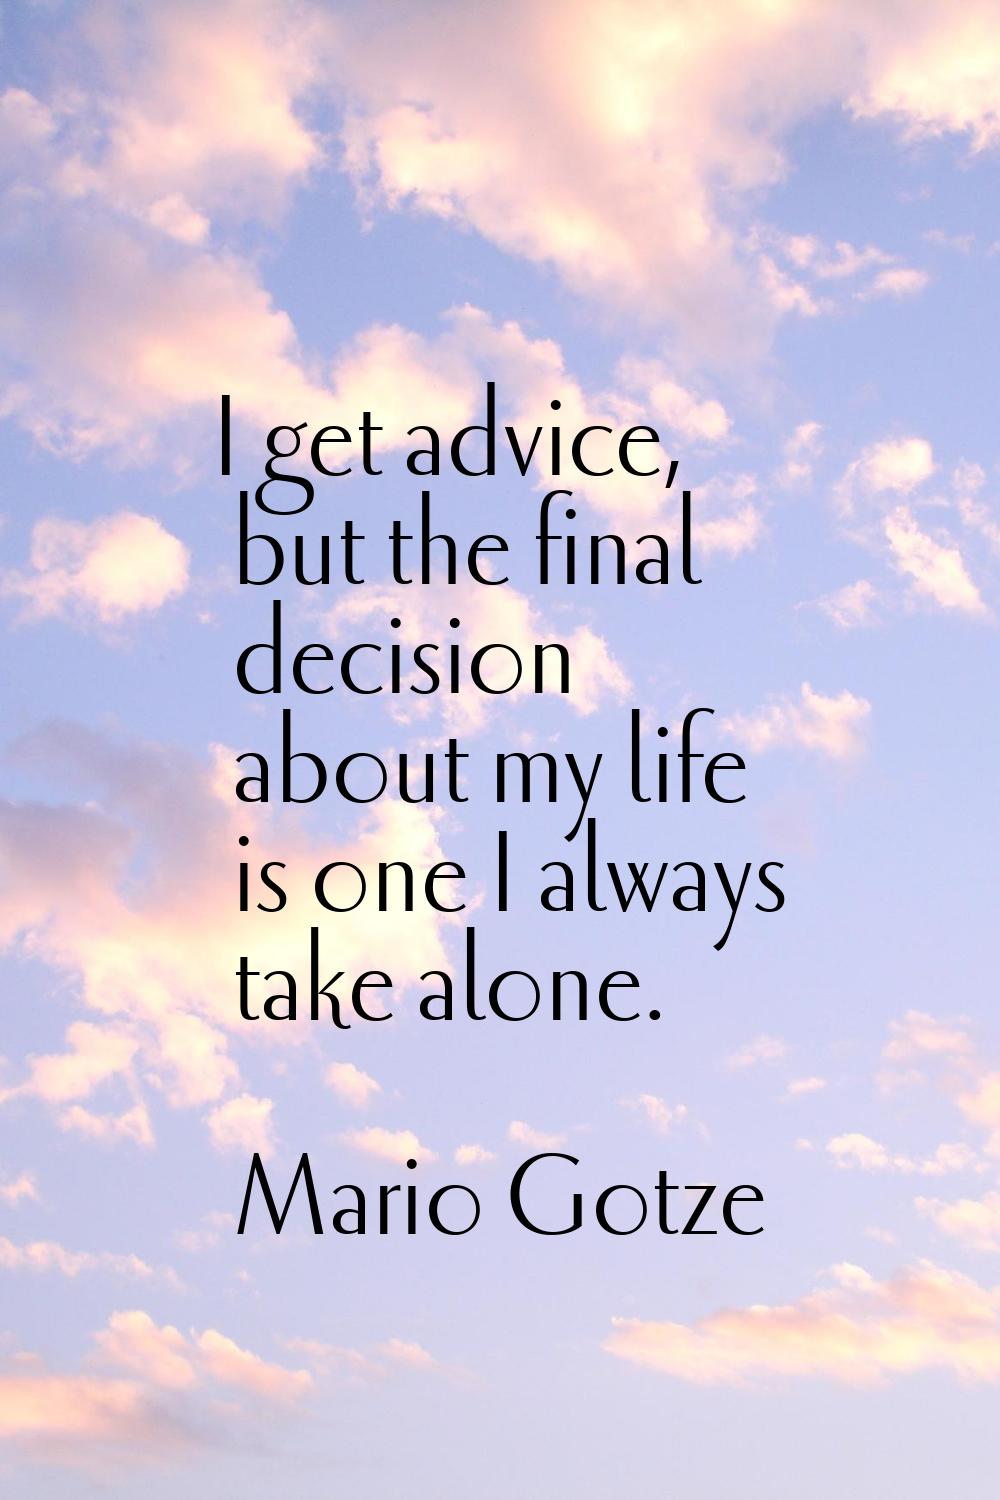 I get advice, but the final decision about my life is one I always take alone.